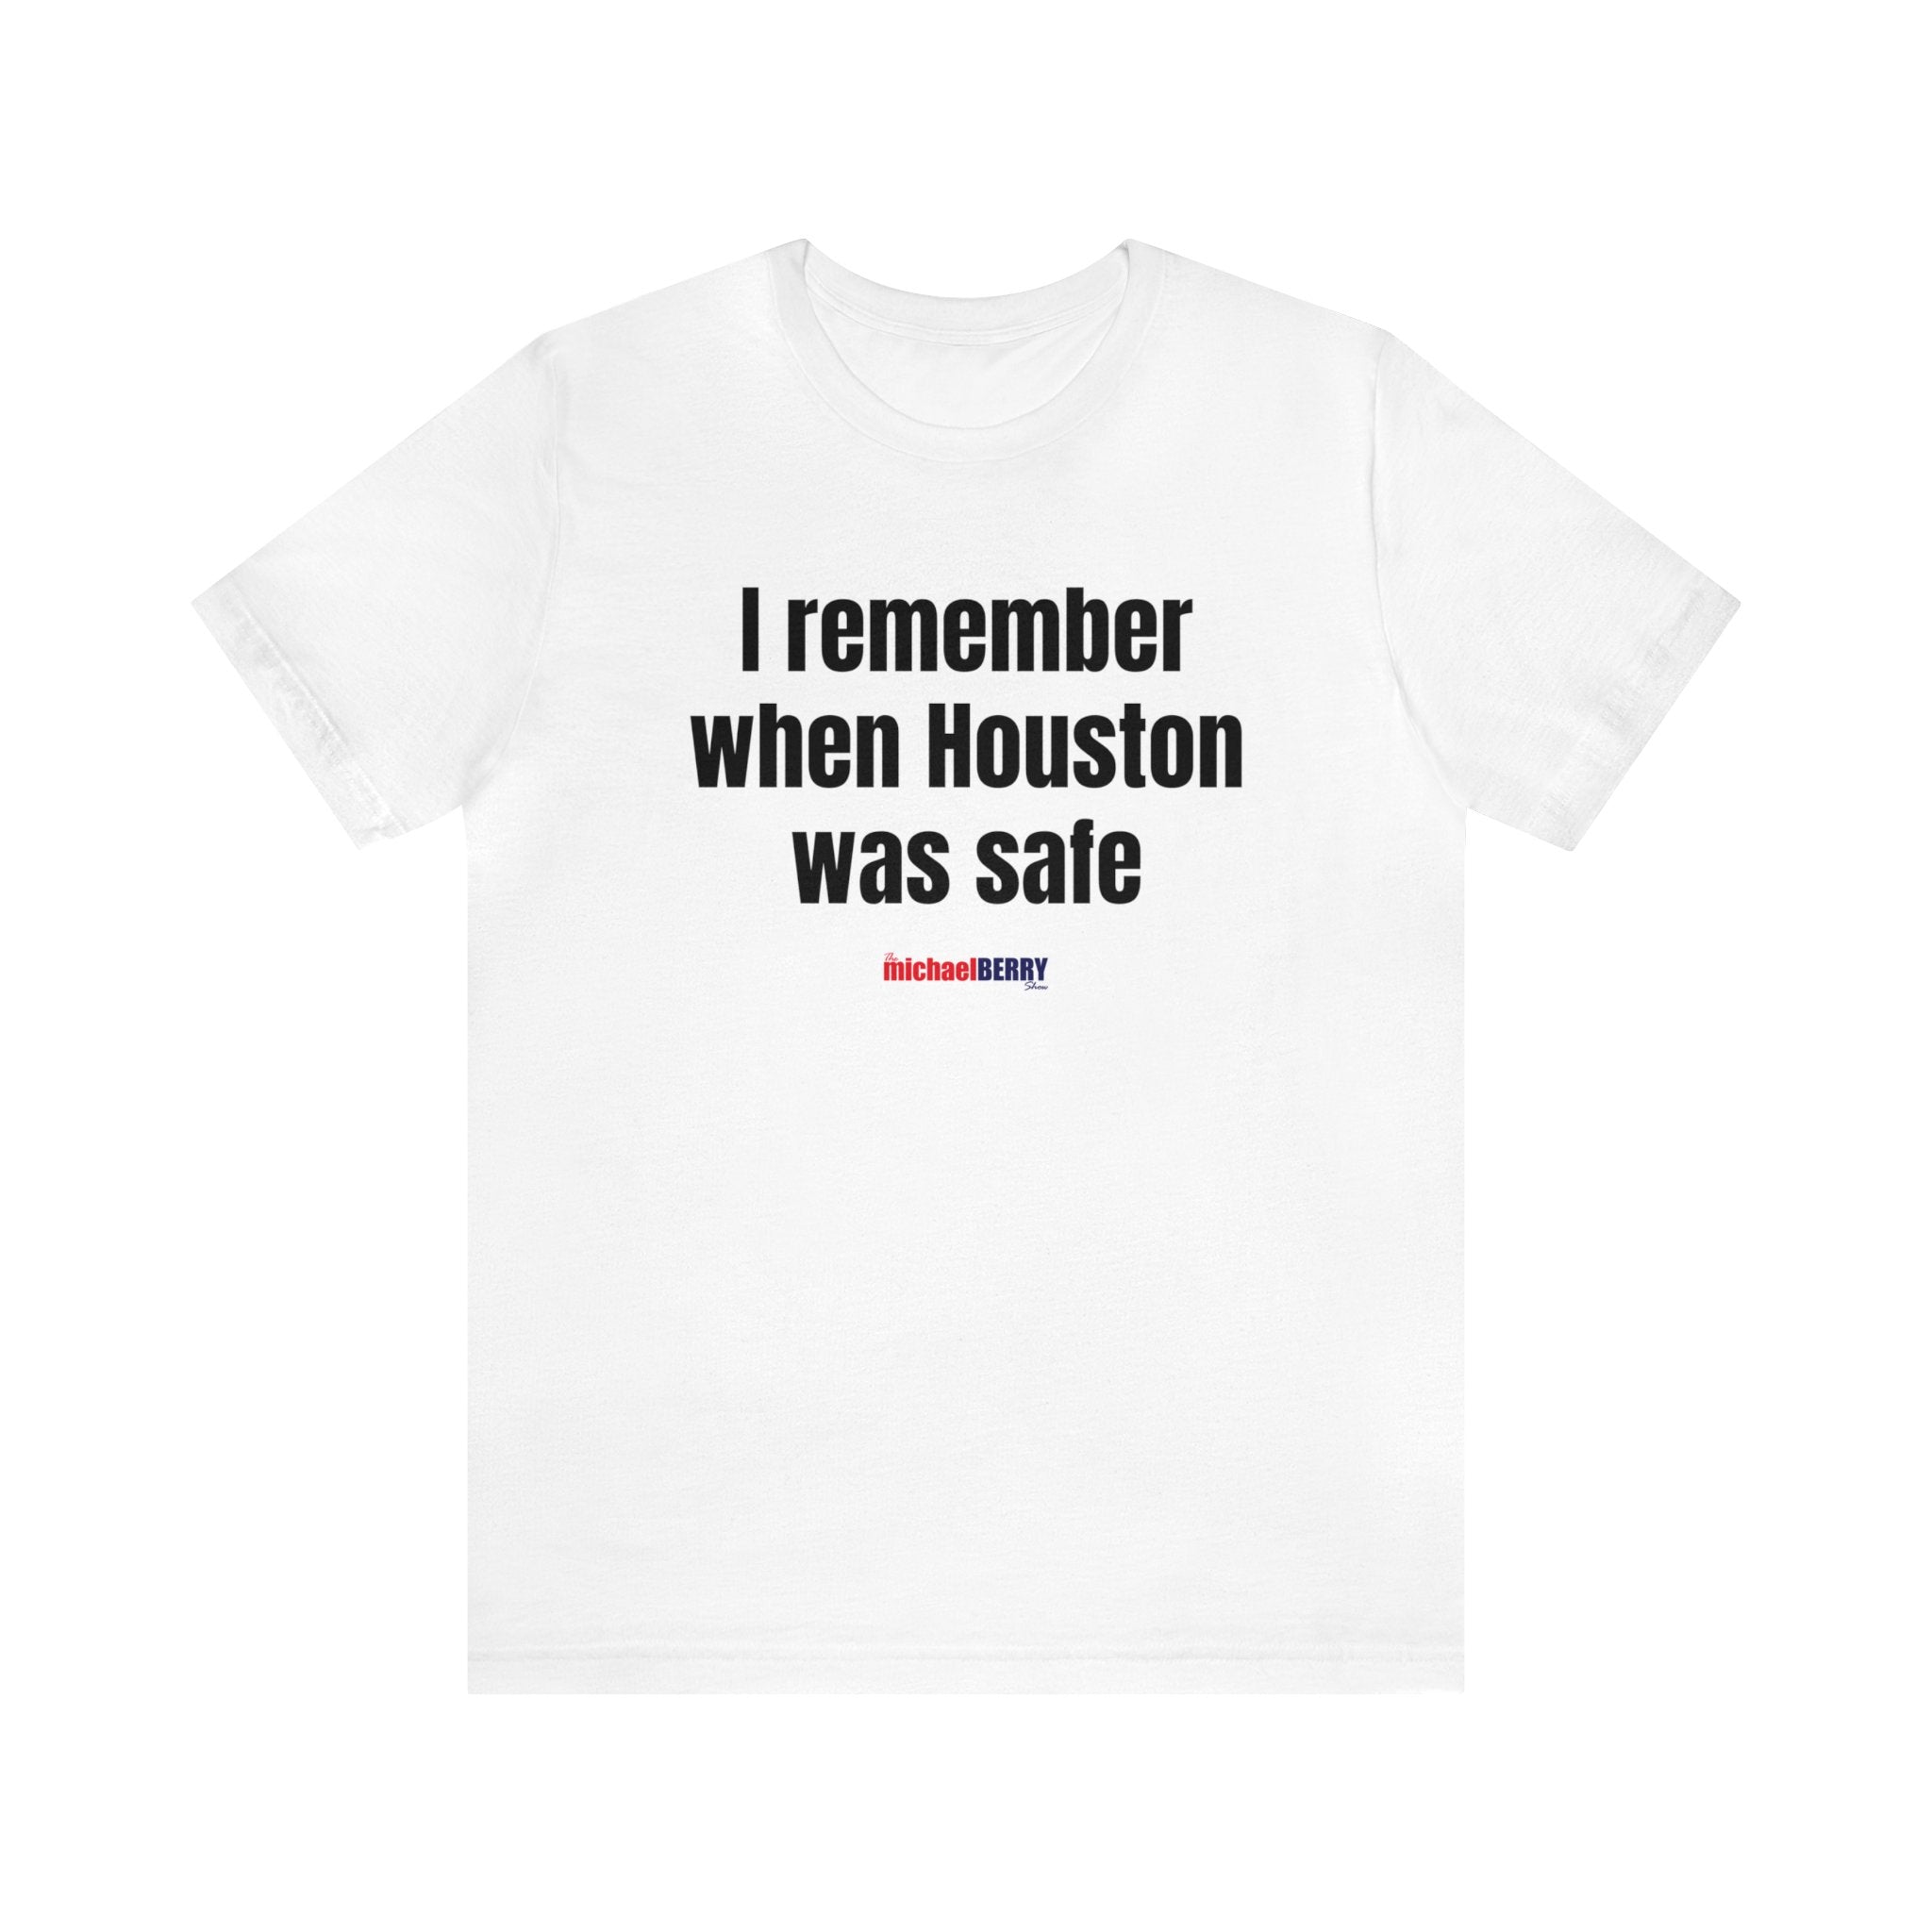 I remember when Houston was safe - Unisex Jersey Short Sleeve Tee